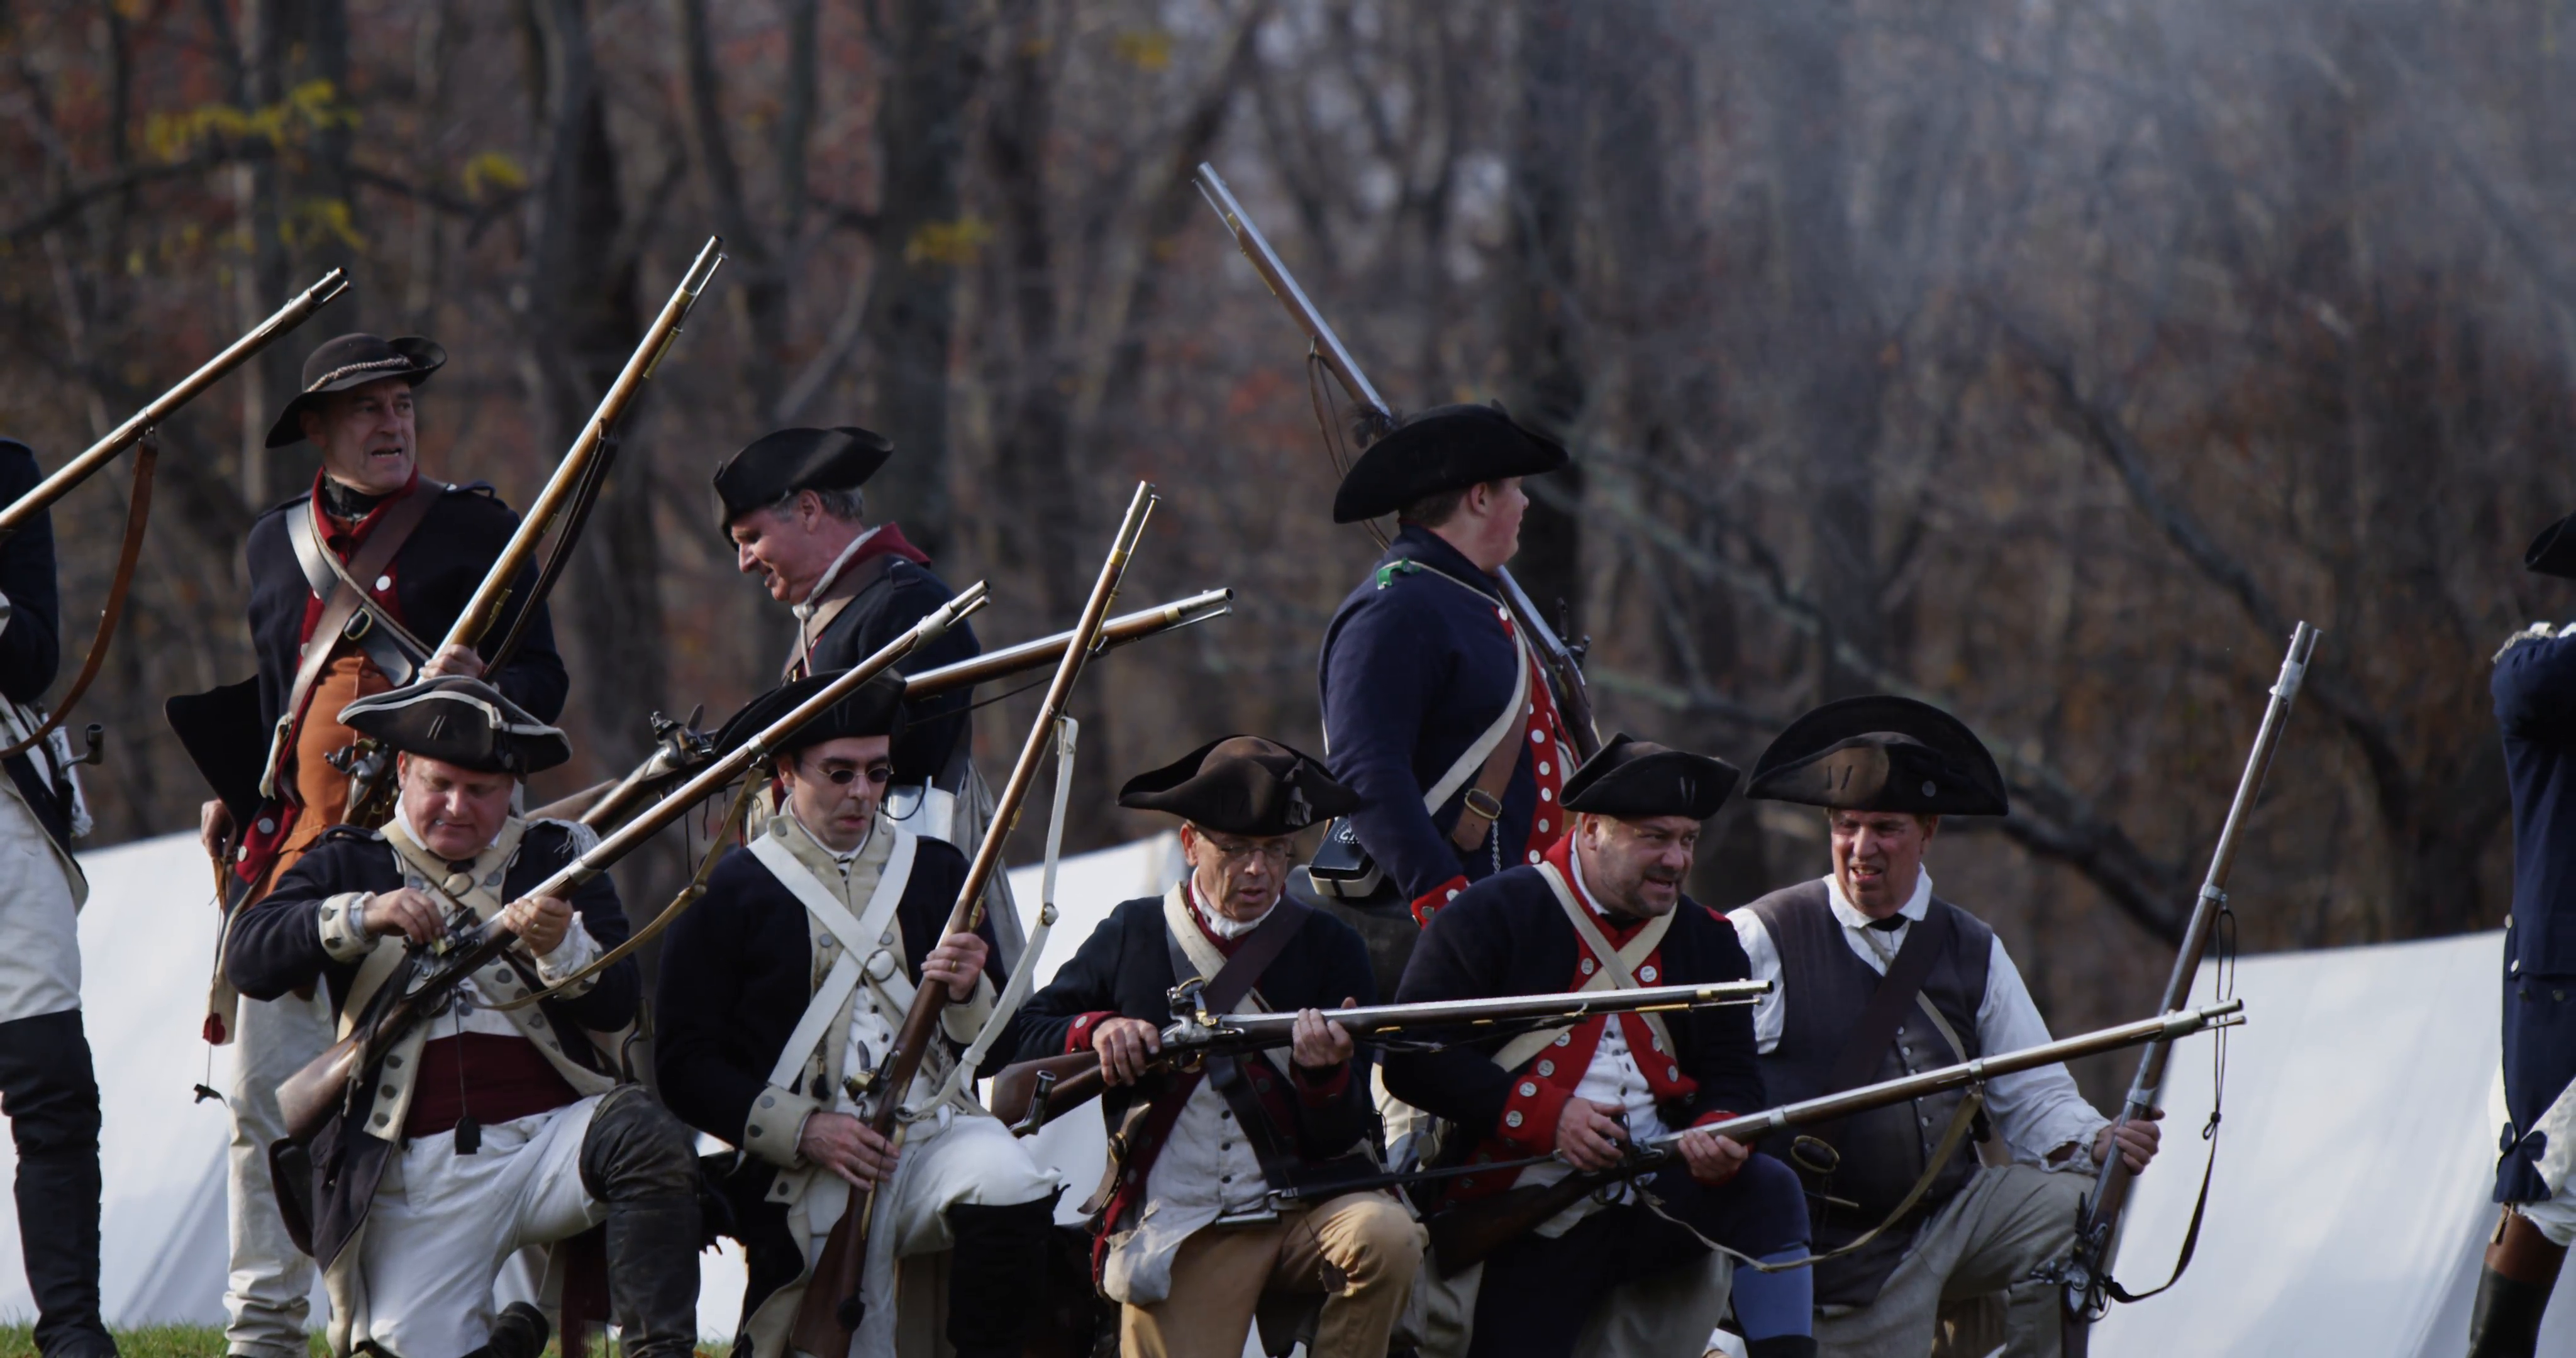 Revolutionary War Reenactment. Continental Soldiers Reload During Battle In Slow Motion. Shot On Red Epic, 4K Dci Hd Resolution. Danbury, Ct/usa   November Hdpng.com  - Revolutionary War, Transparent background PNG HD thumbnail